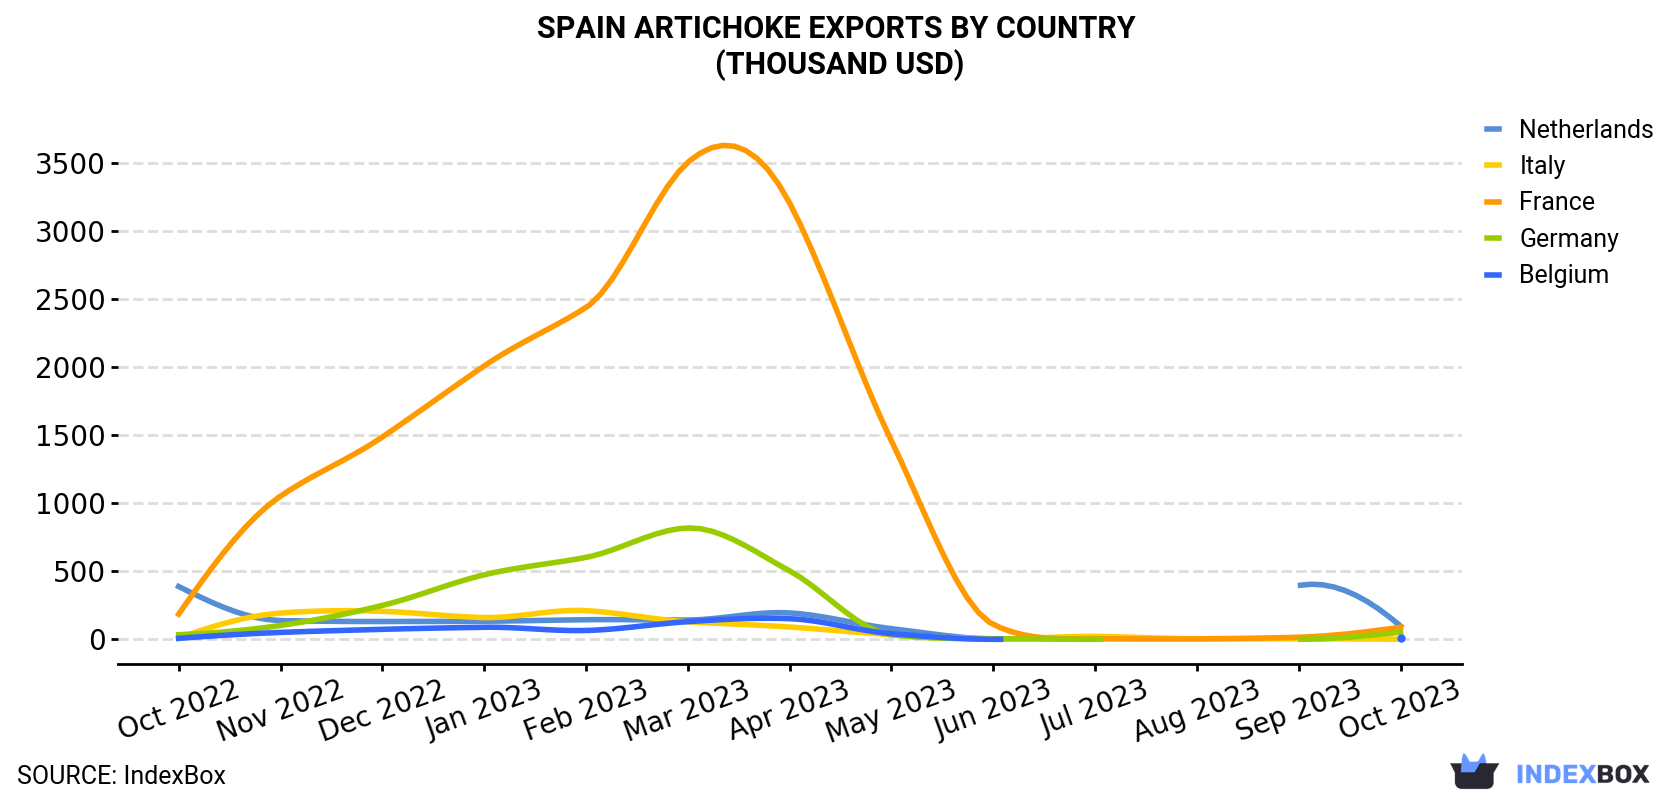 Spain Artichoke Exports By Country (Thousand USD)